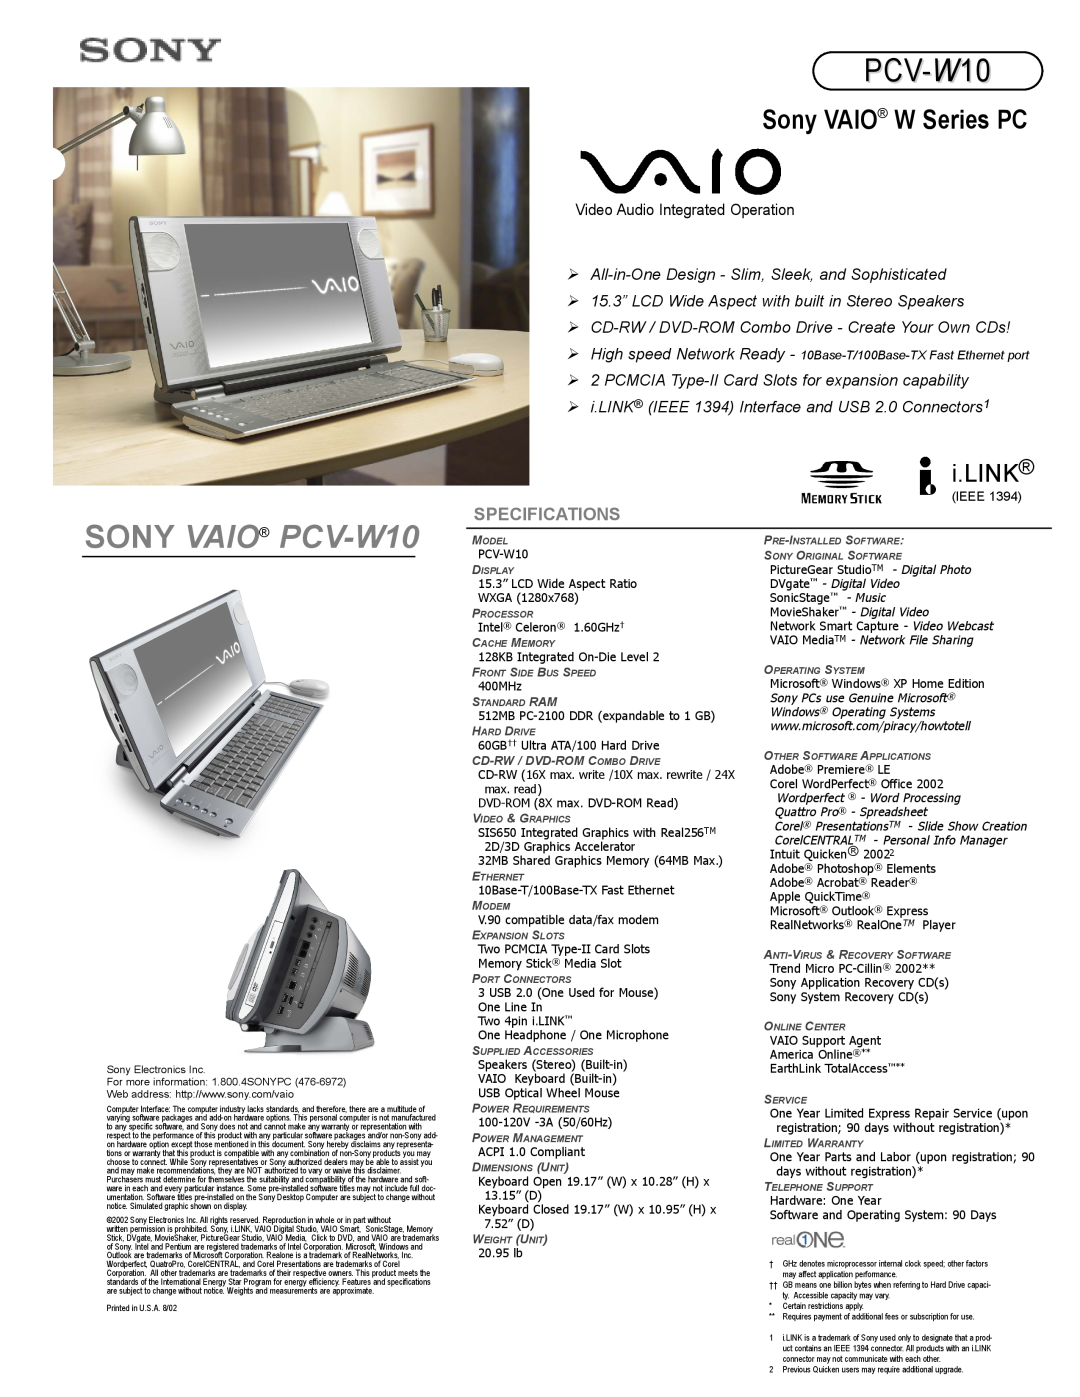 Sony specifications SONY VAIO PCV-W10, Sony VAIO W Series PC, i.LINK, Specifications, Video Audio Integrated Operation 